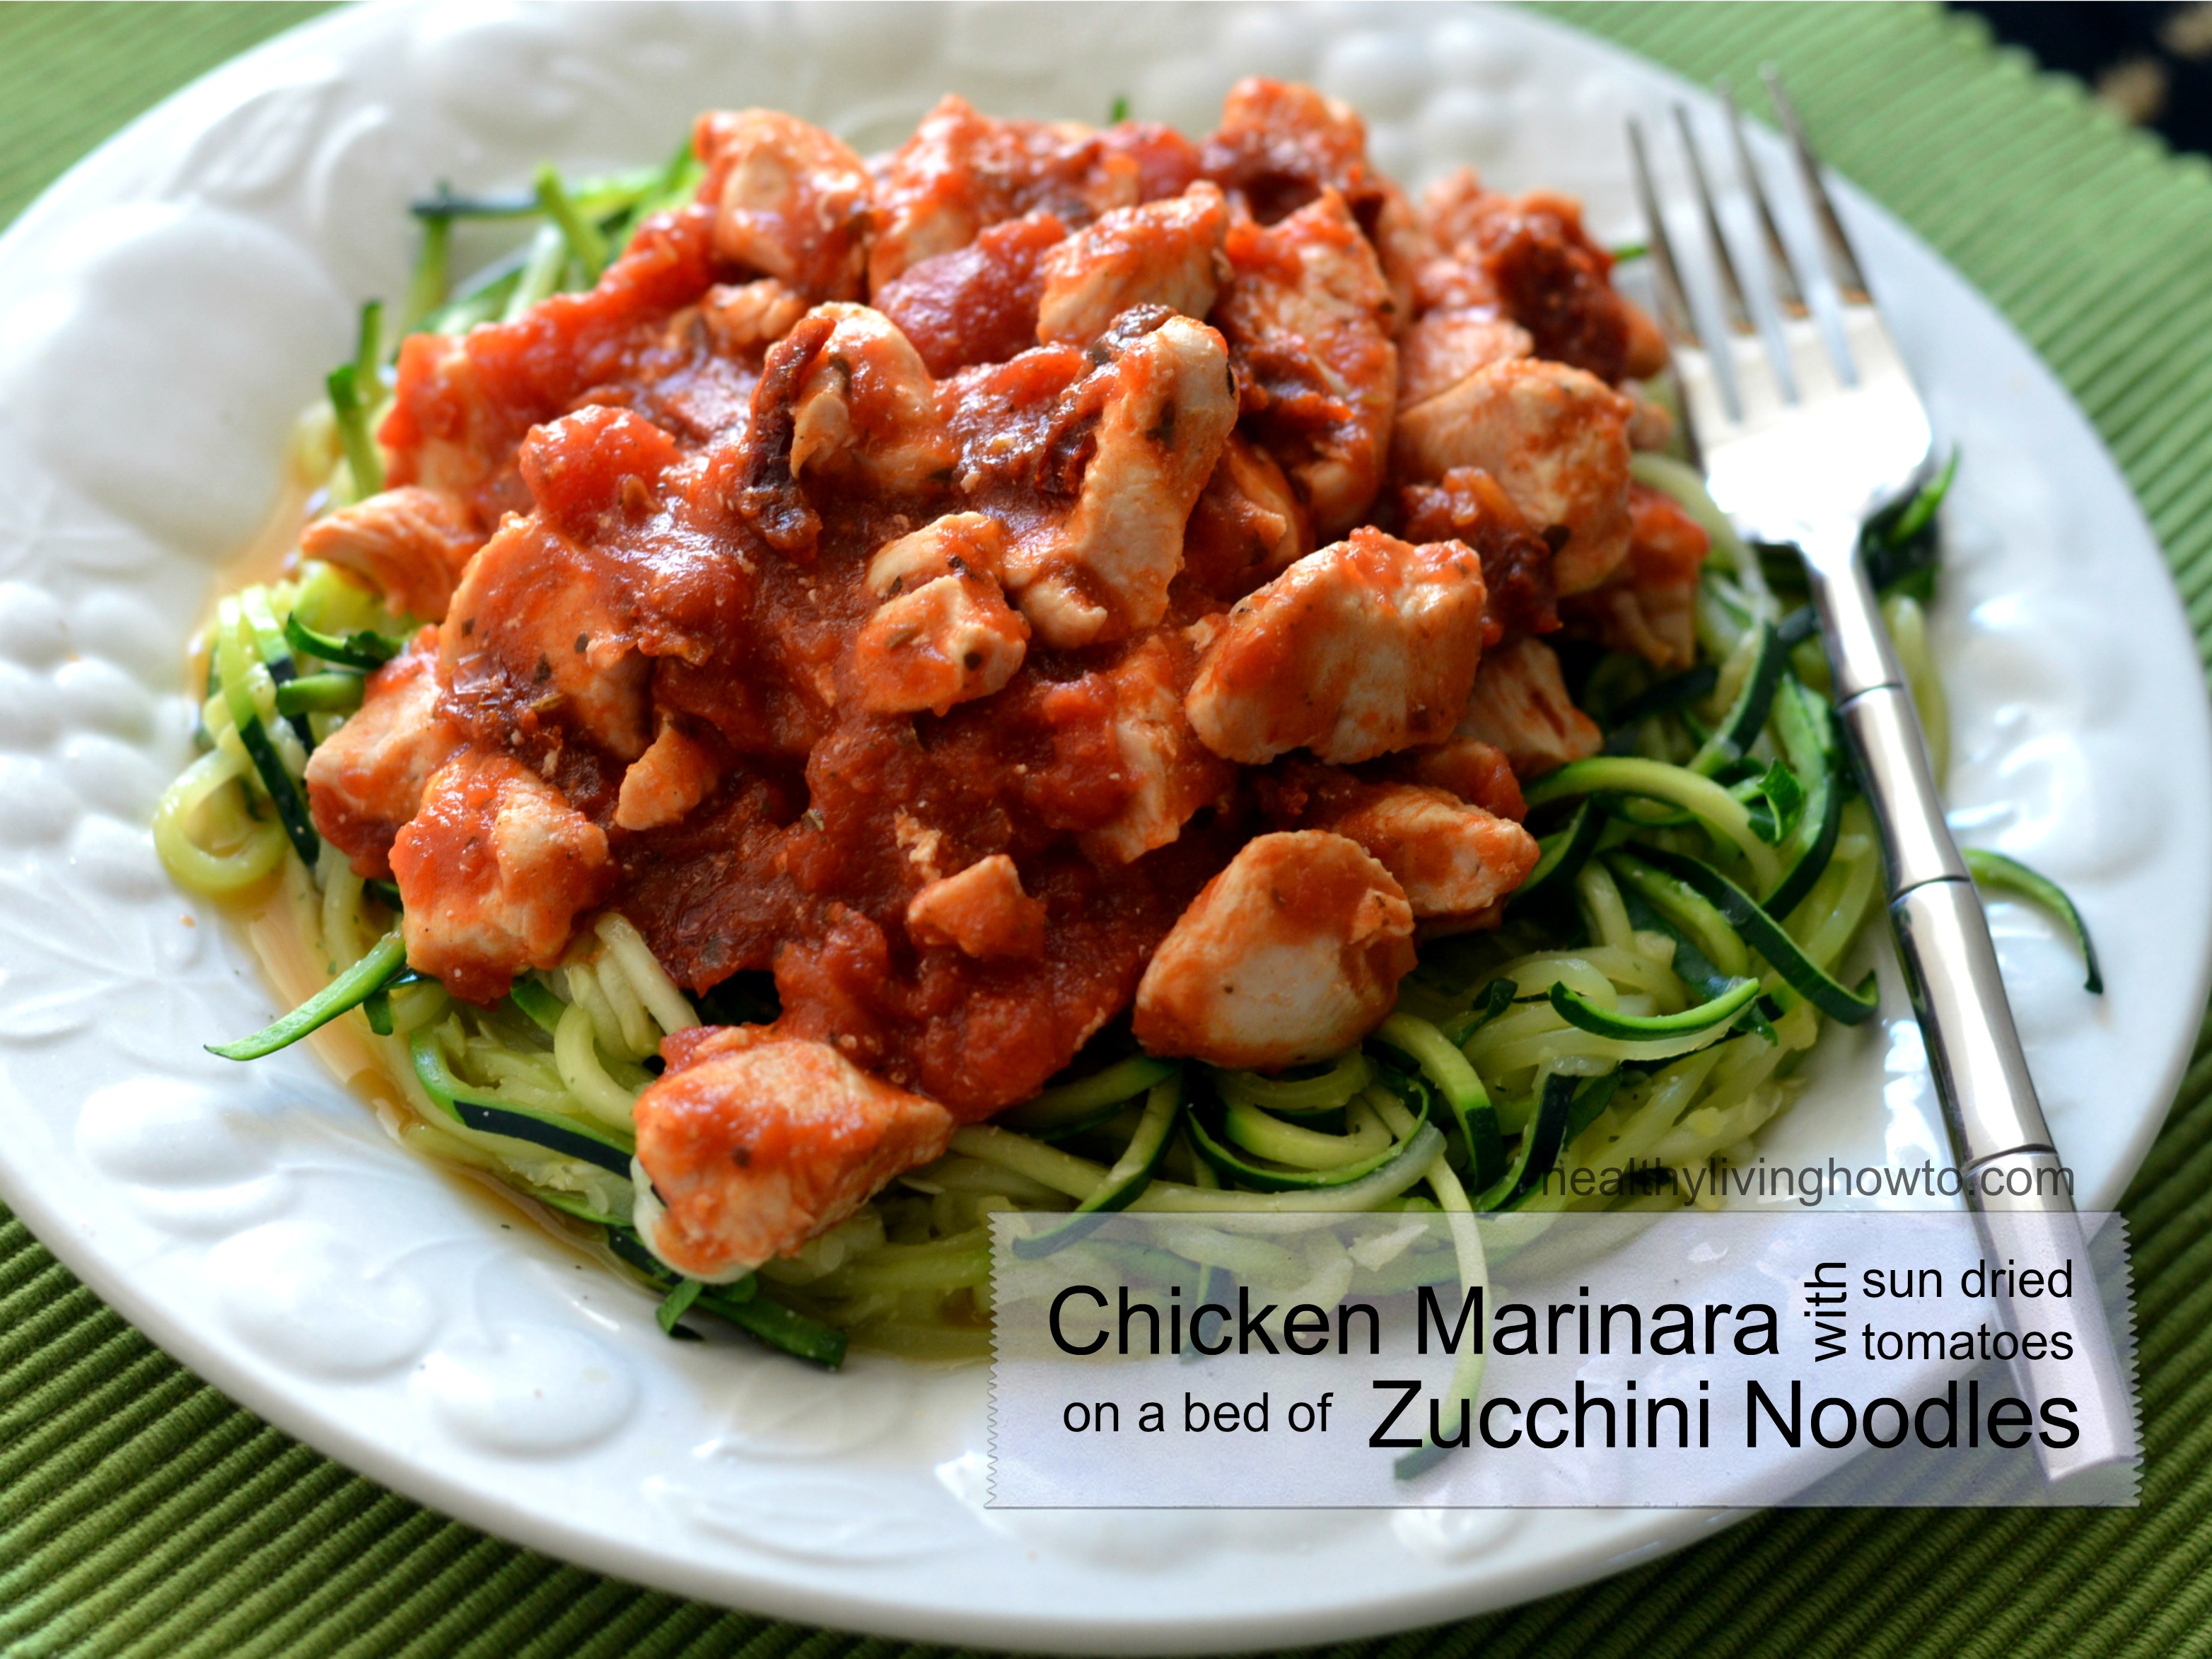 Chicken Marinara with Sun Dried Tomatoes over Zucchini Noodles